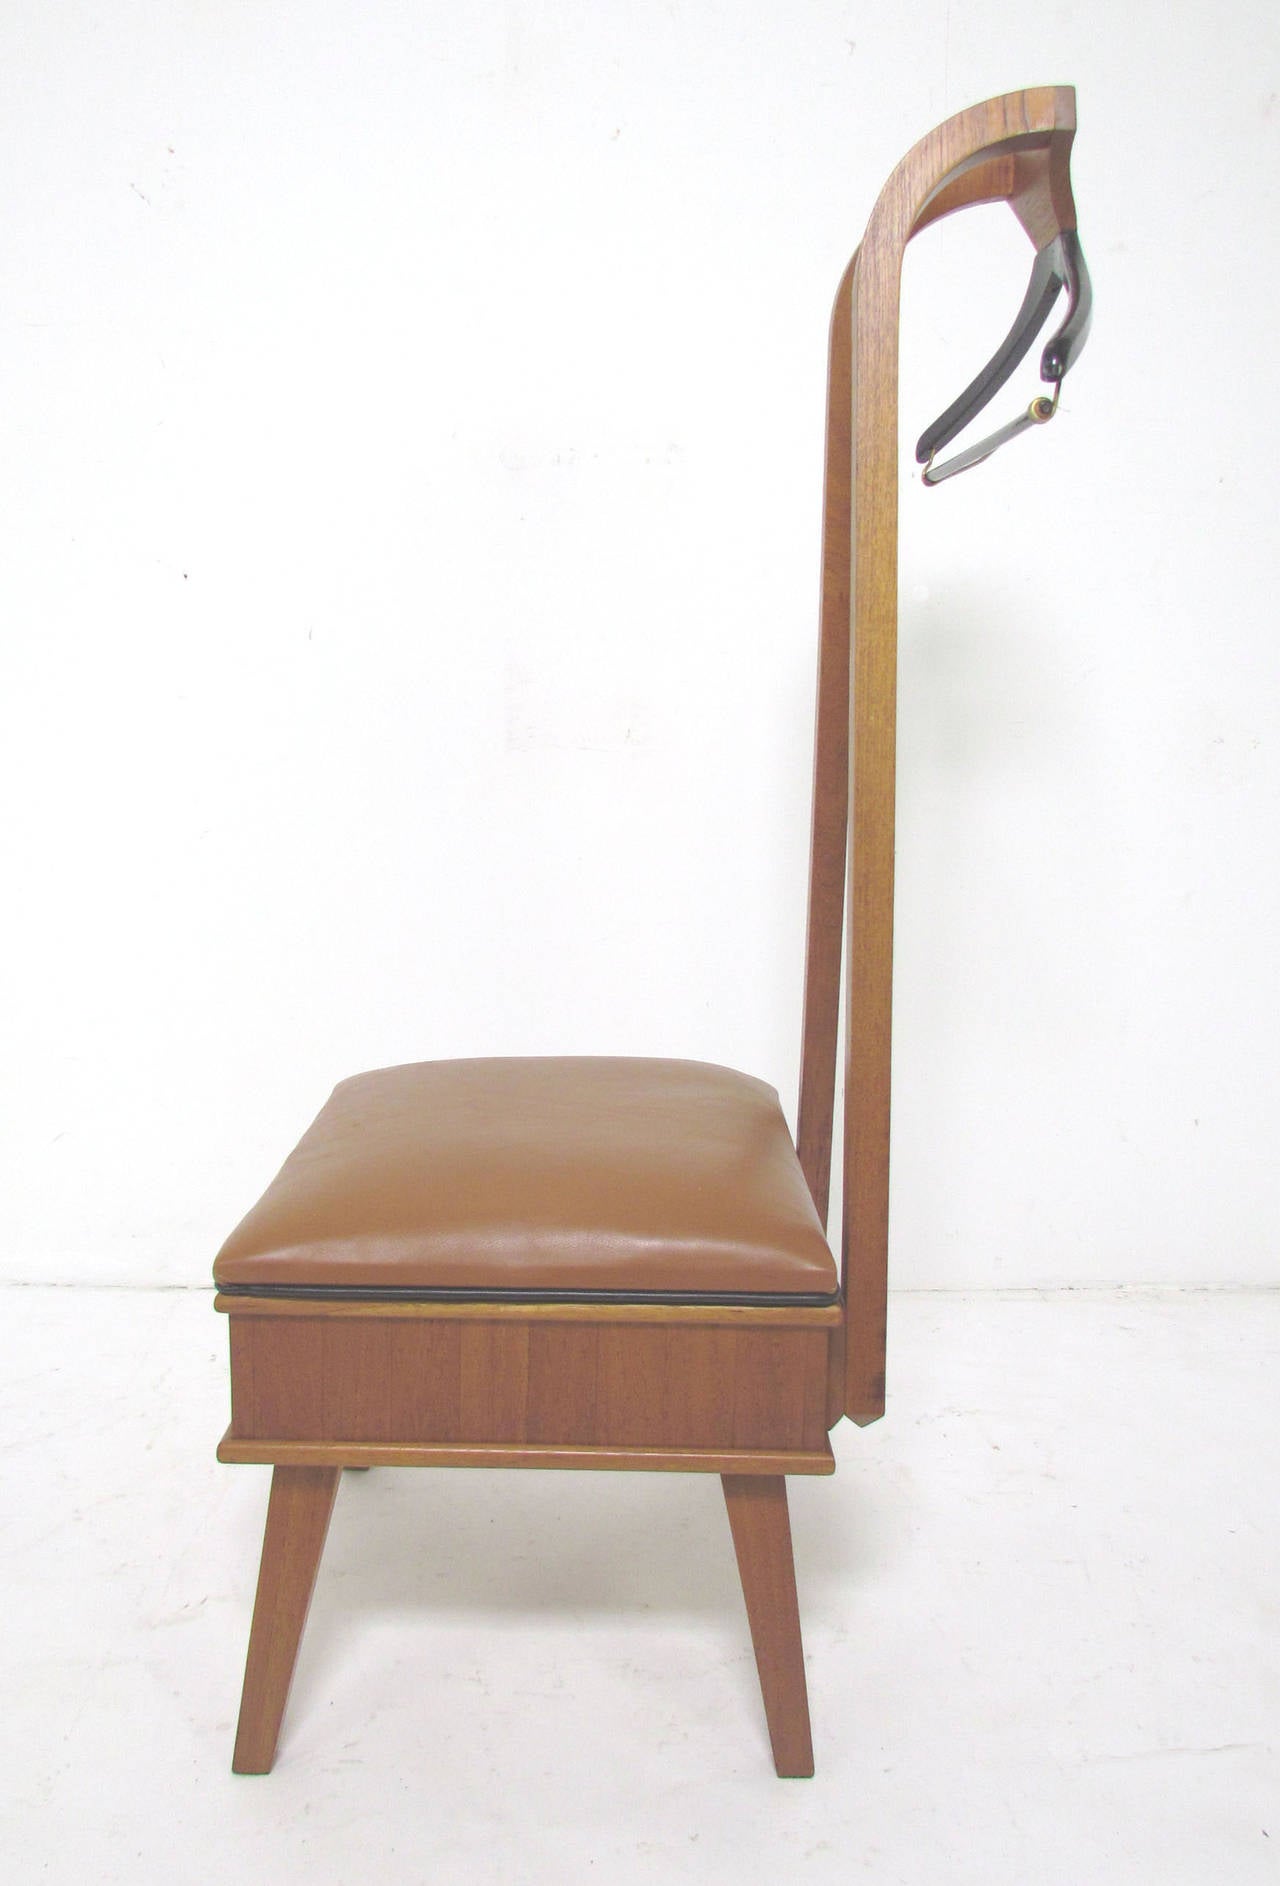 Handmade Mid-Century Modern valet chair in walnut and teak with a leather seat and integrated hanger for a gentleman's suit, apparently signed 